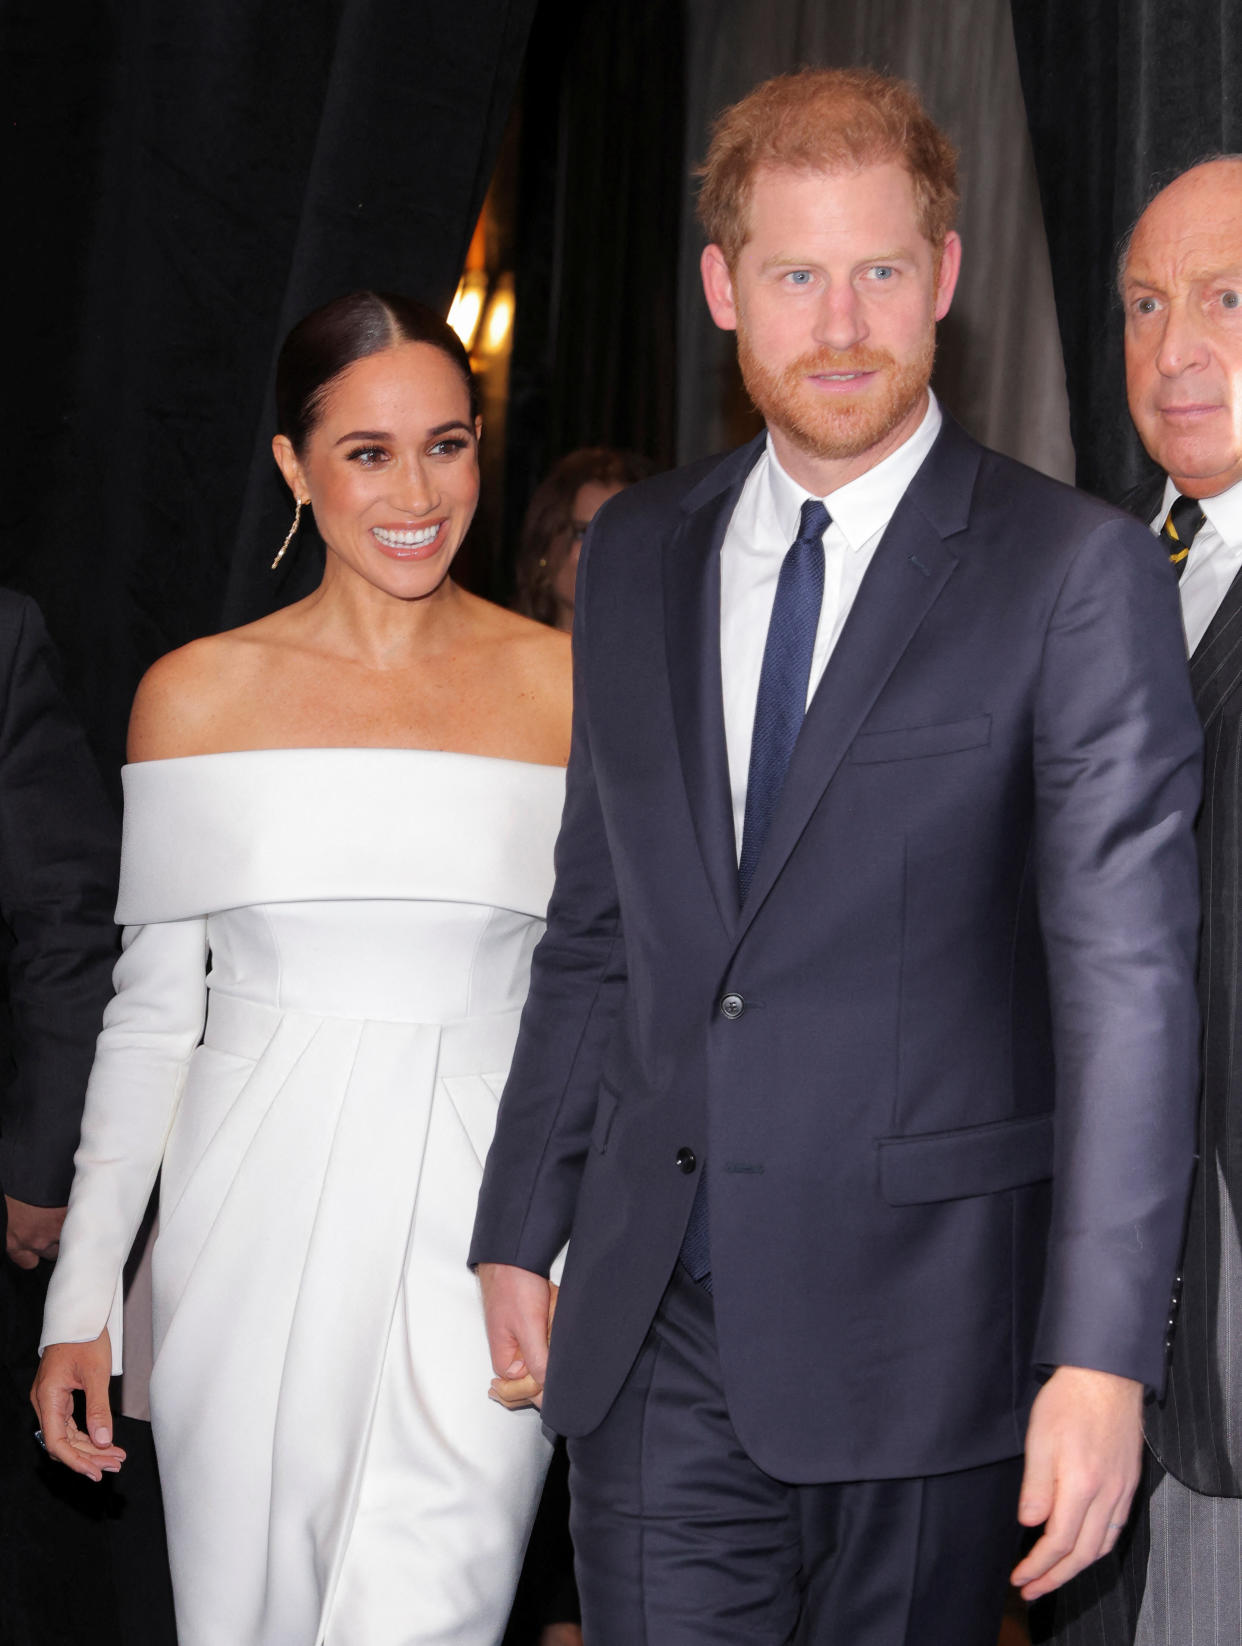 Britain's Prince Harry, Duke of Sussex, Meghan, Duchess of Sussex attend the 2022 Robert F. Kennedy Human Rights Ripple of Hope Award Gala in New York City, U.S., December 6, 2022. REUTERS/Andrew Kelly